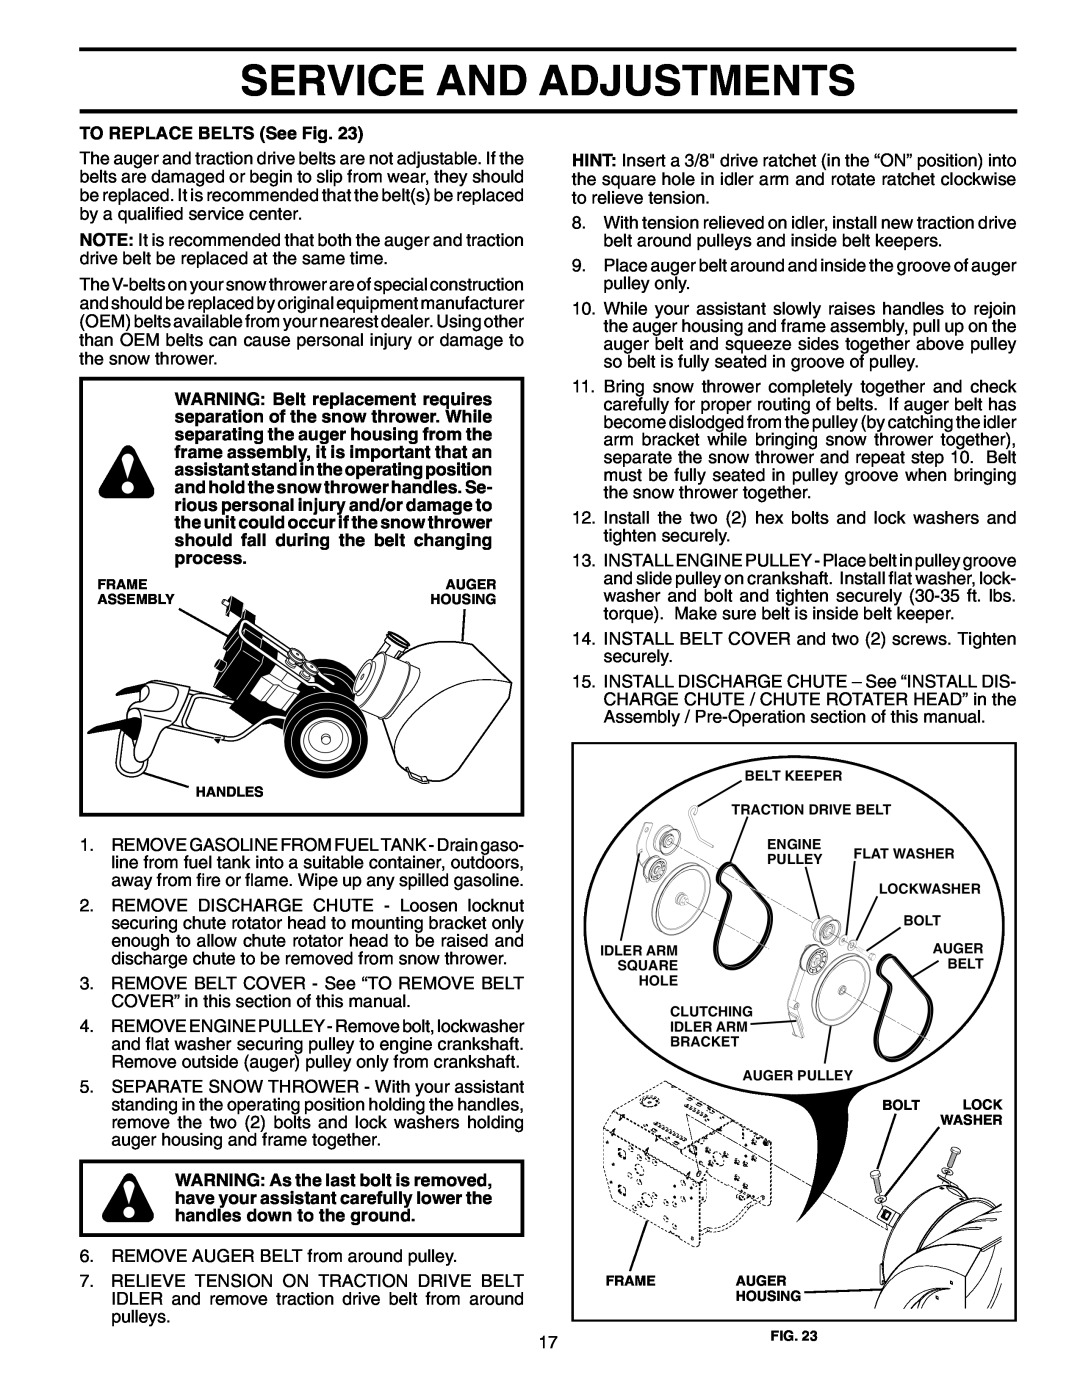 Husqvarna 927SBEXP owner manual Service And Adjustments, TO REPLACE BELTS See Fig 